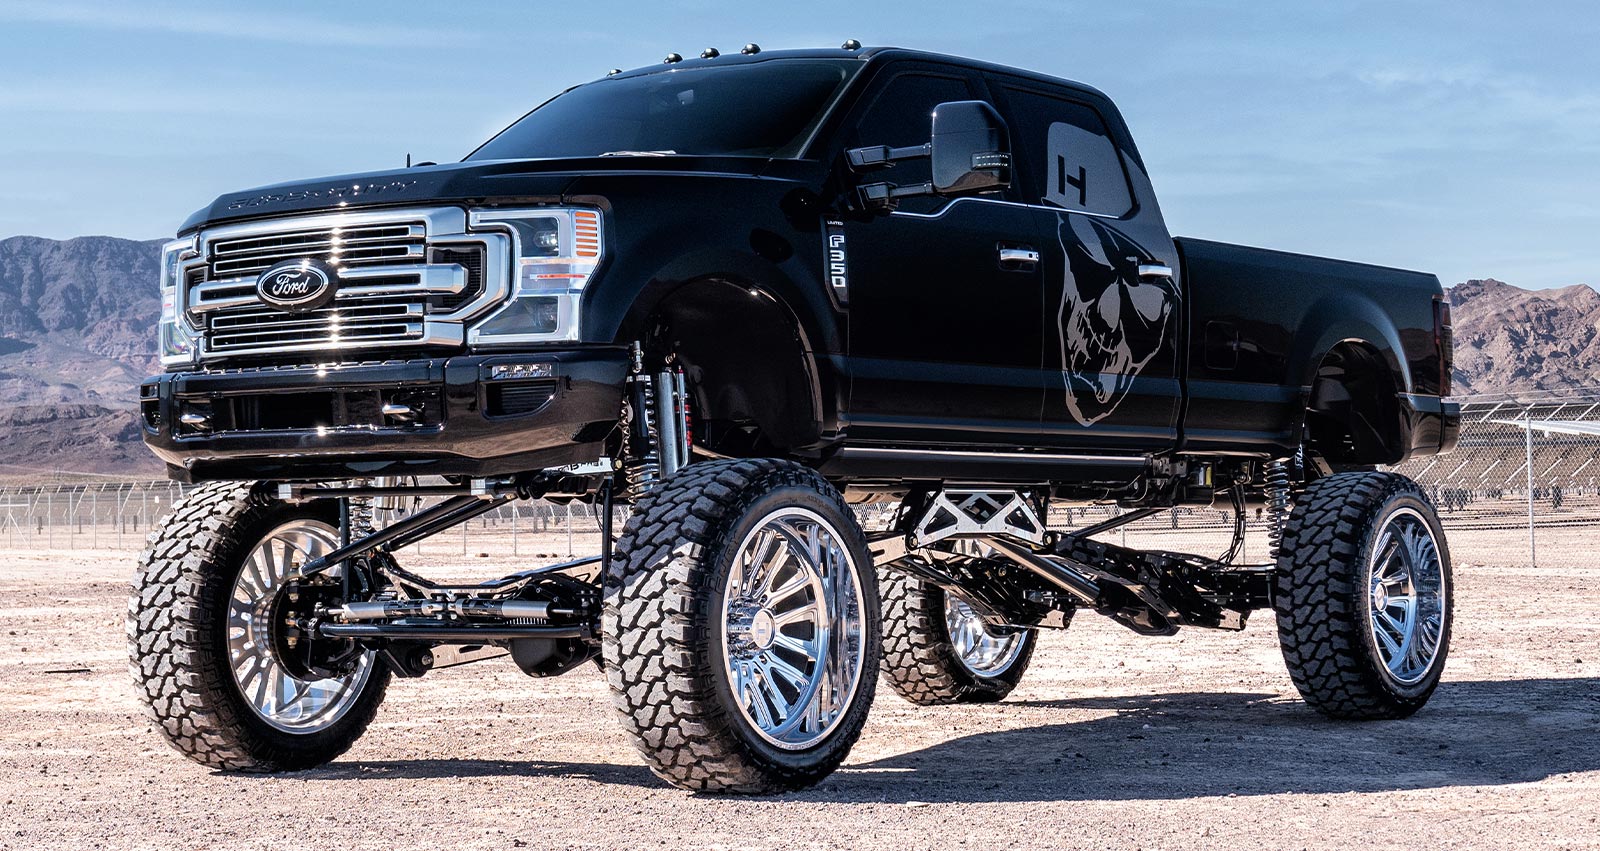 Cateye on 24s and 33s  Truck Reviews 